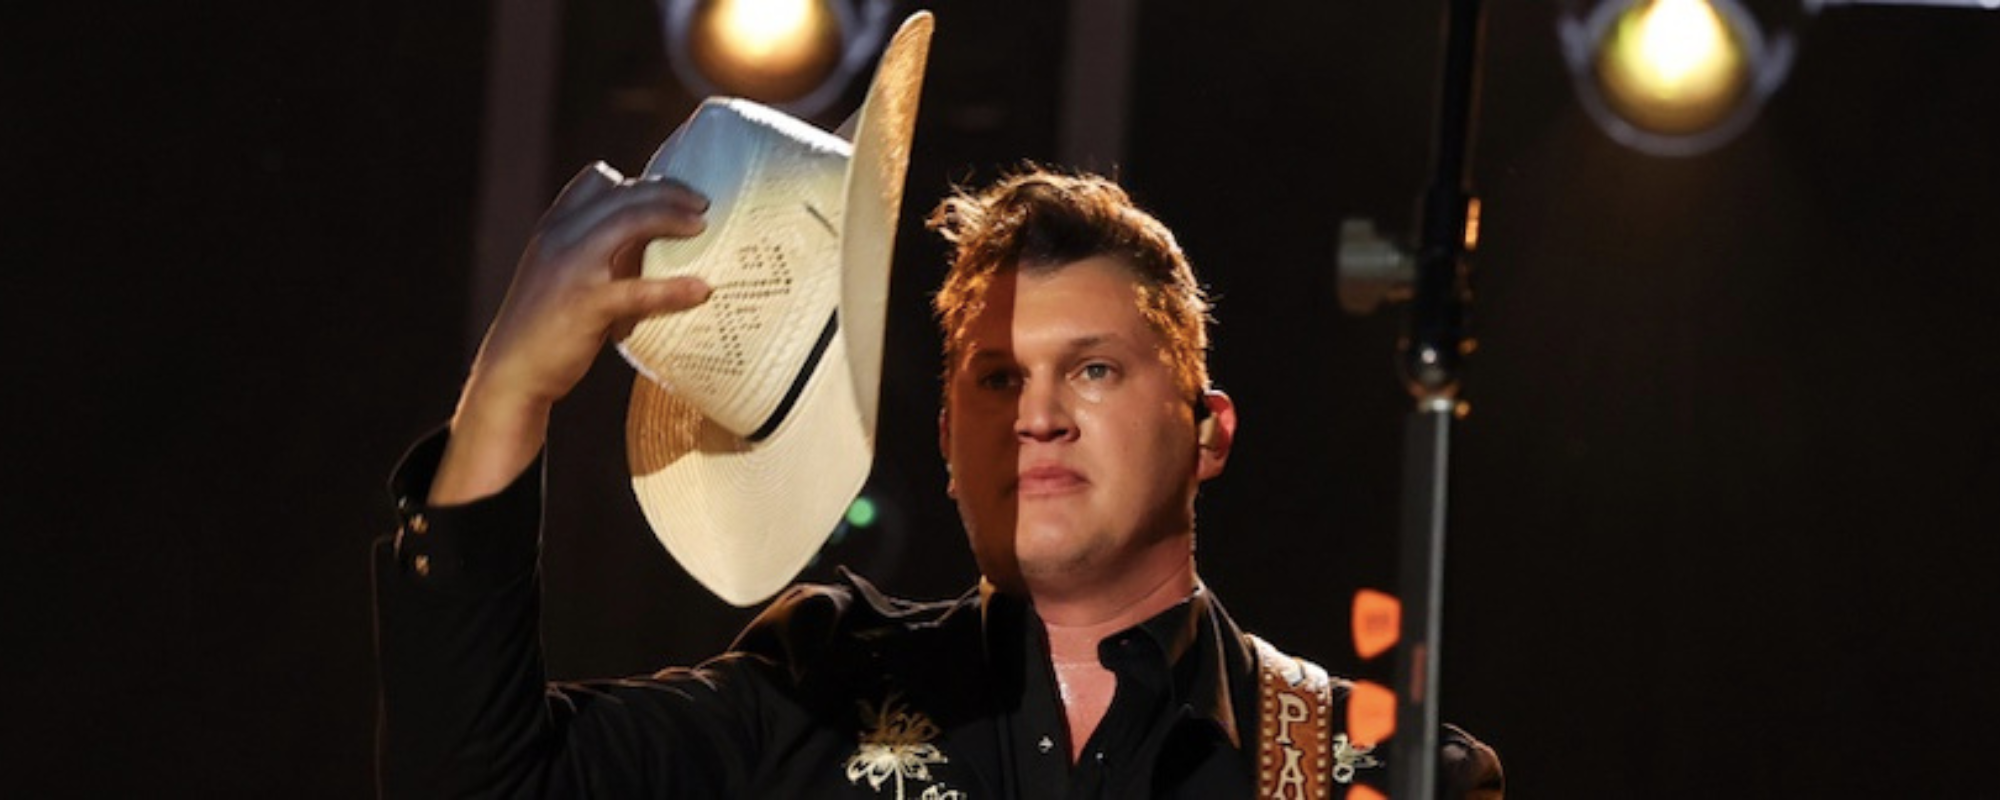 Exclusive: Jon Pardi Says He’s “Retired” From Drinking, Talks Sobriety and Weight Loss with Amazon Music’s Country Heat Weekly